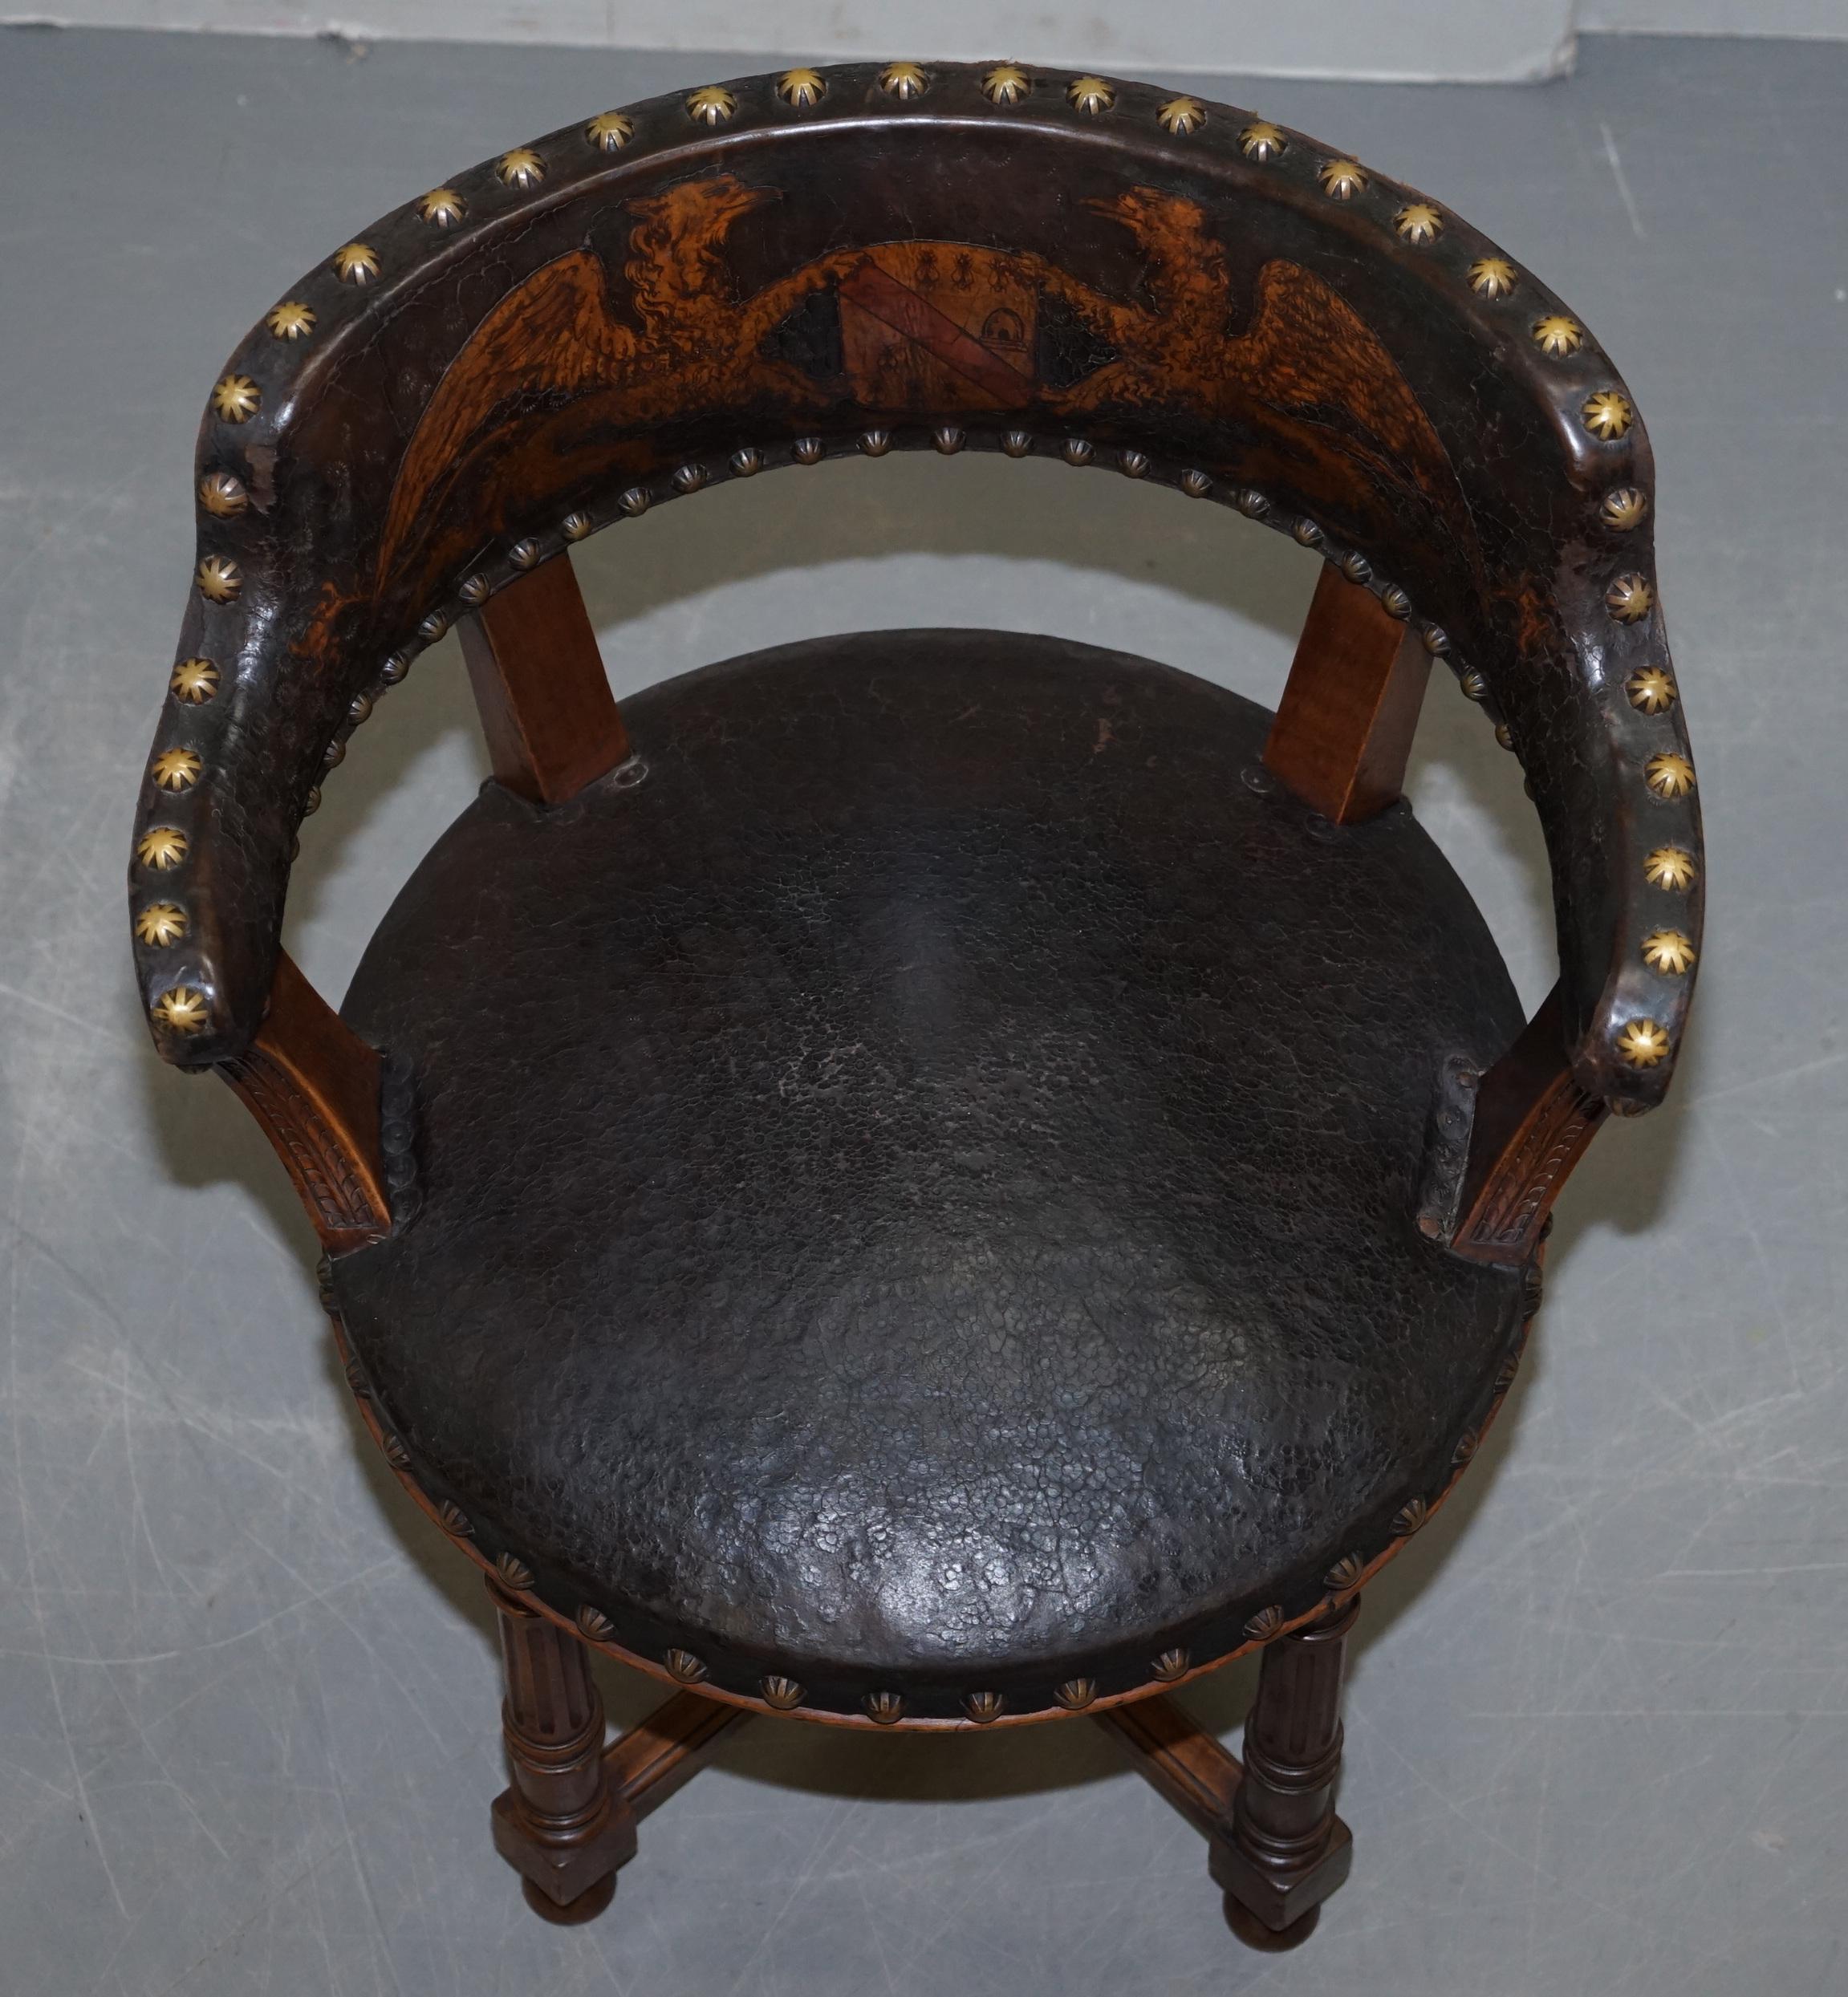 High Victorian Antique Captains Chair with Embossed Leather Armorial Coat of Arms, circa 1880